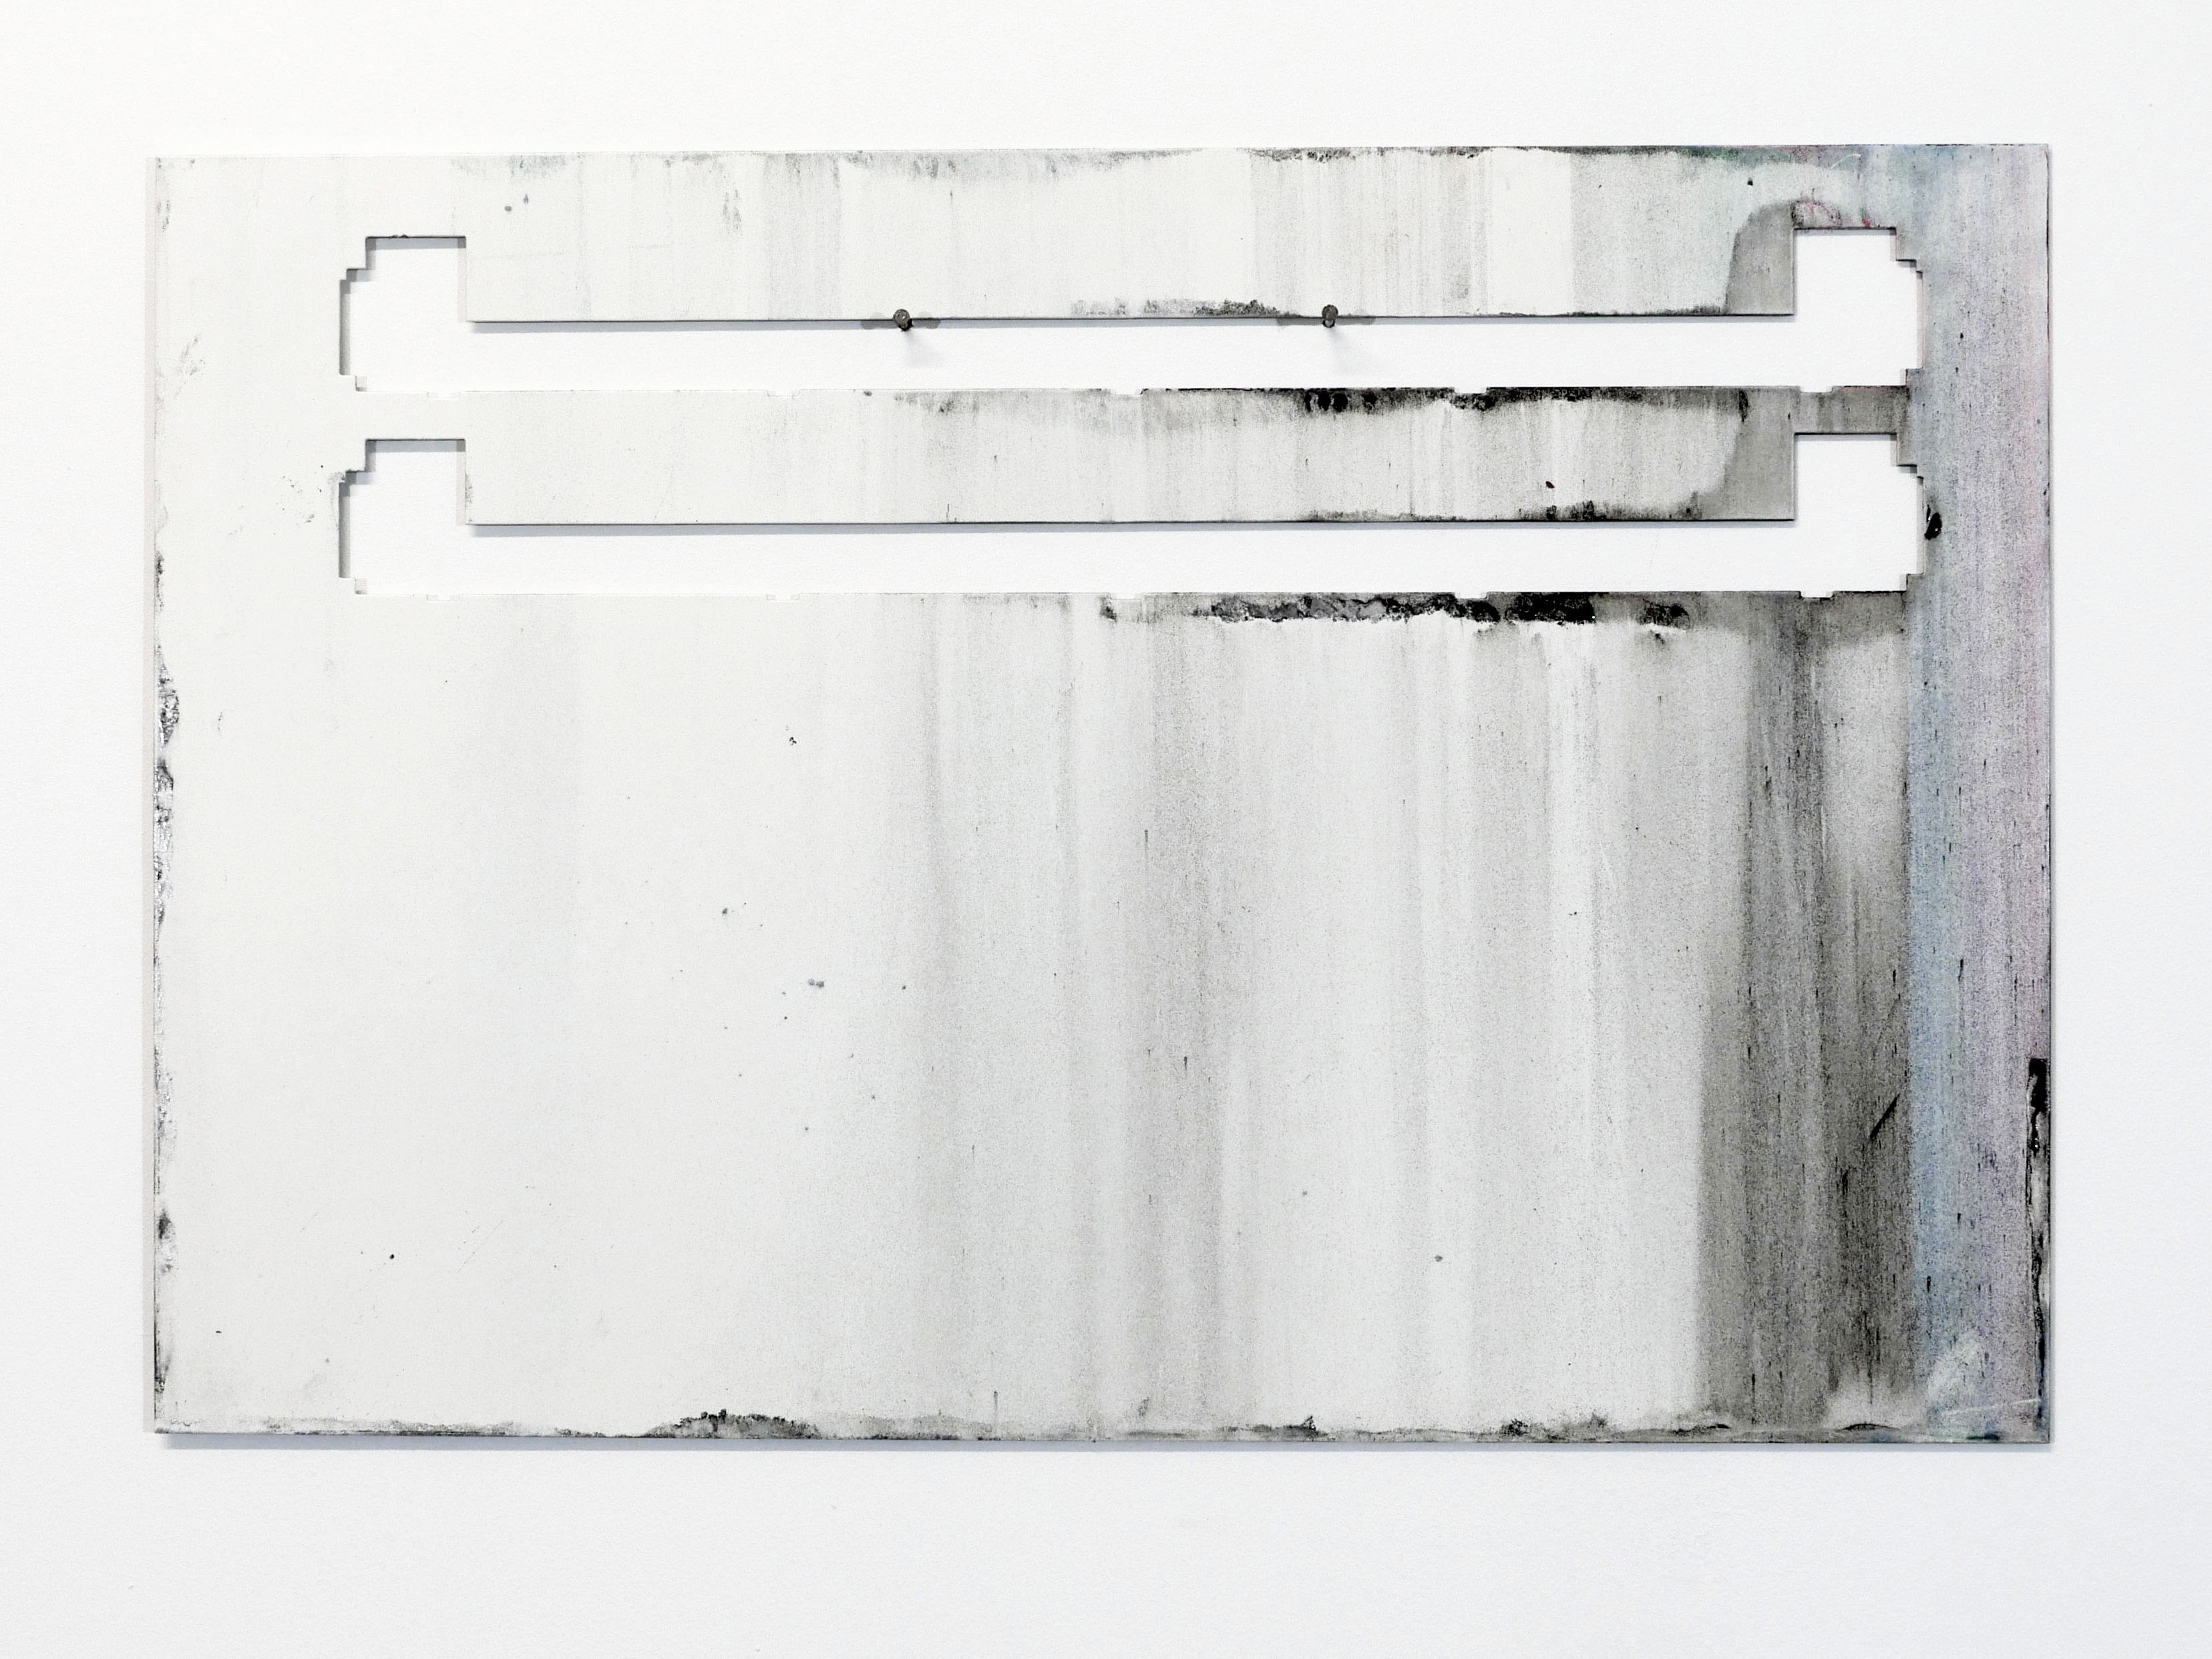 (No content). Powder coating and steel. 40.5 x 59 x 0.2cm. 2019